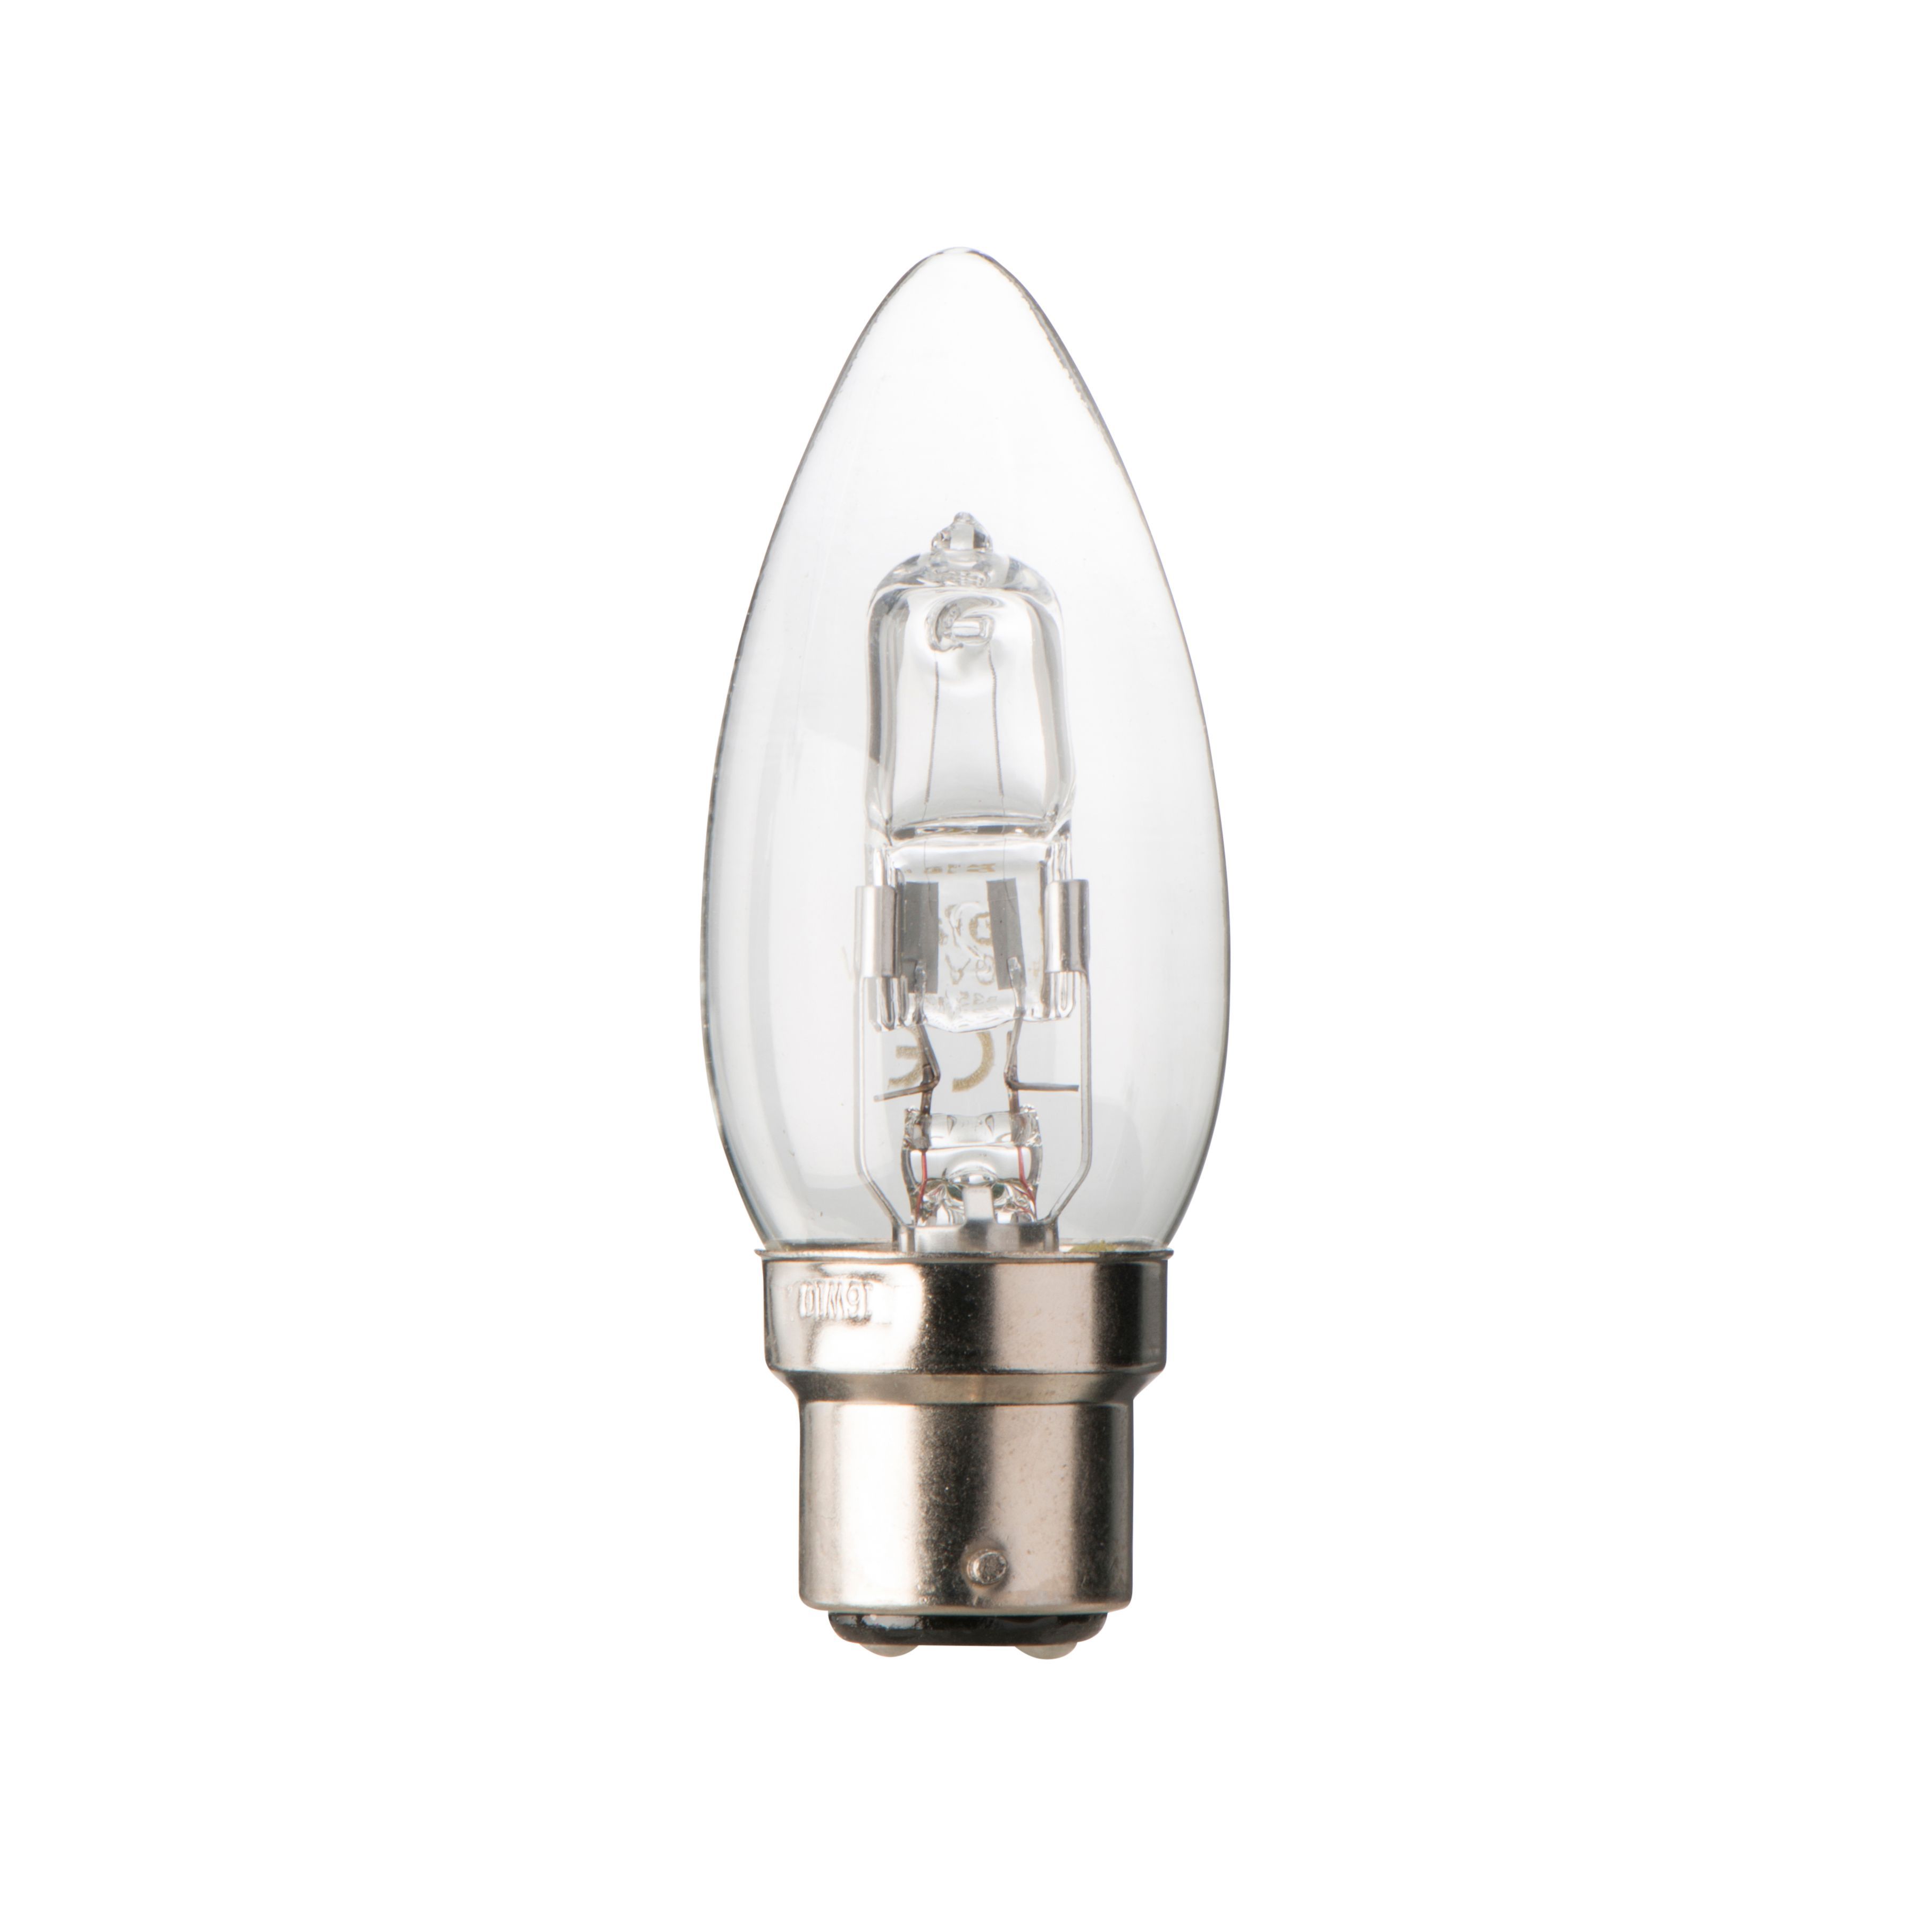 Diall B22 30W Candle Halogen Dimmable Light bulb, Pack of 3